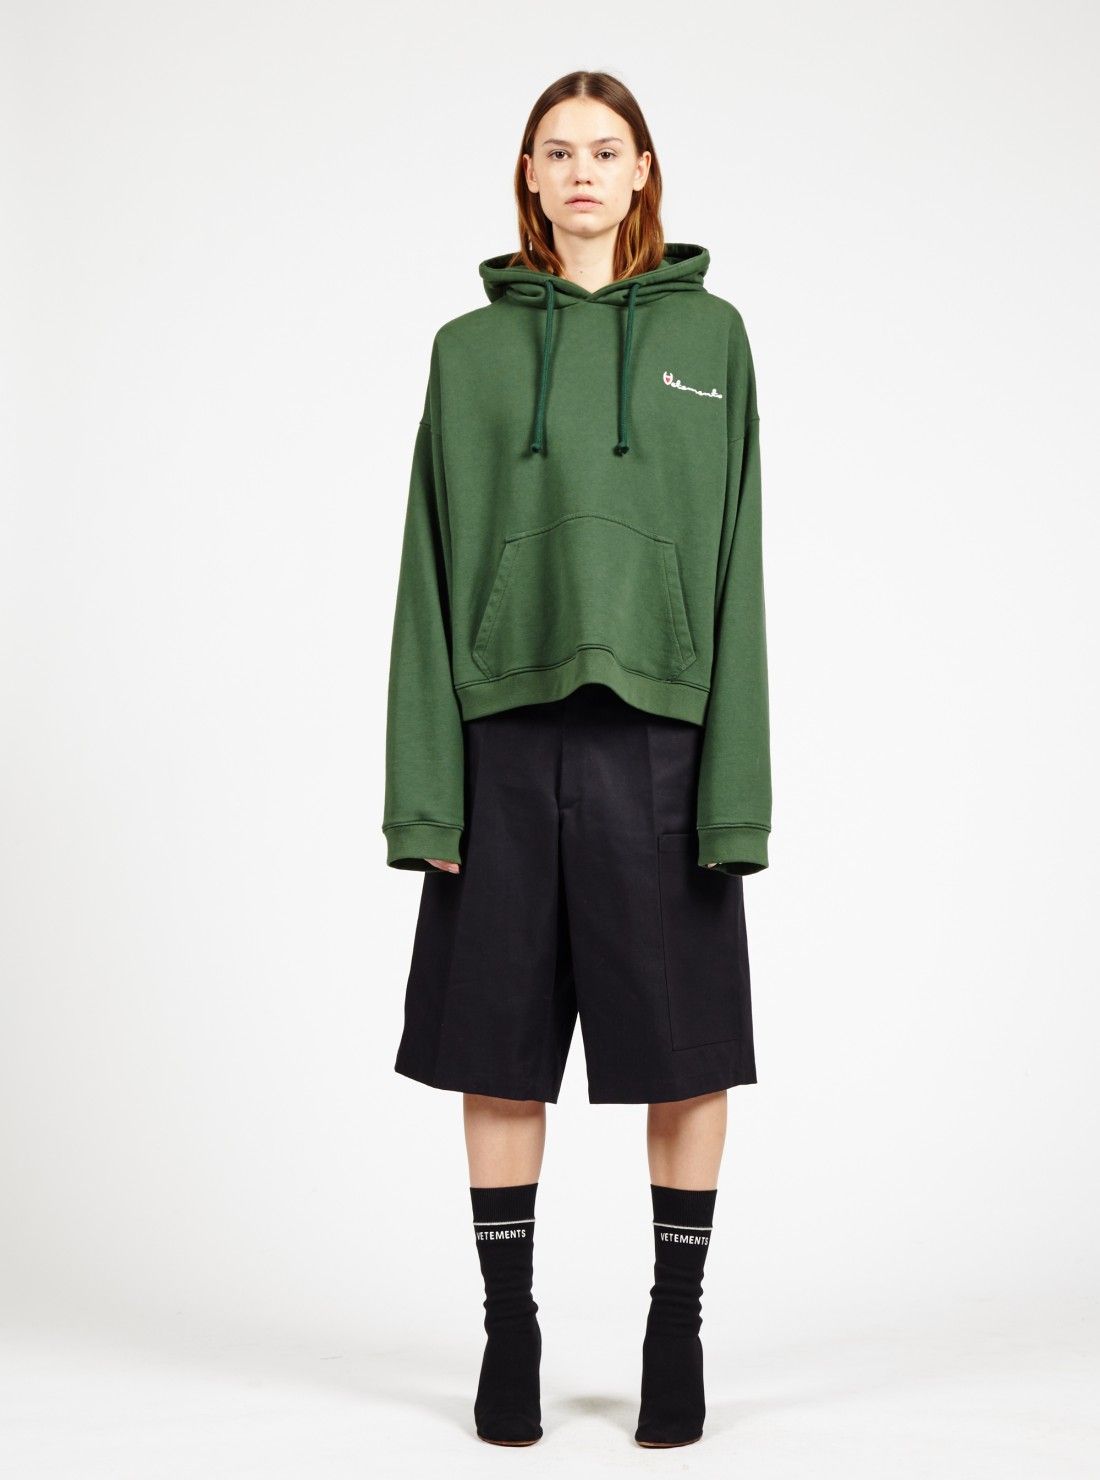 SS16_Vetements_SS16_Selection4